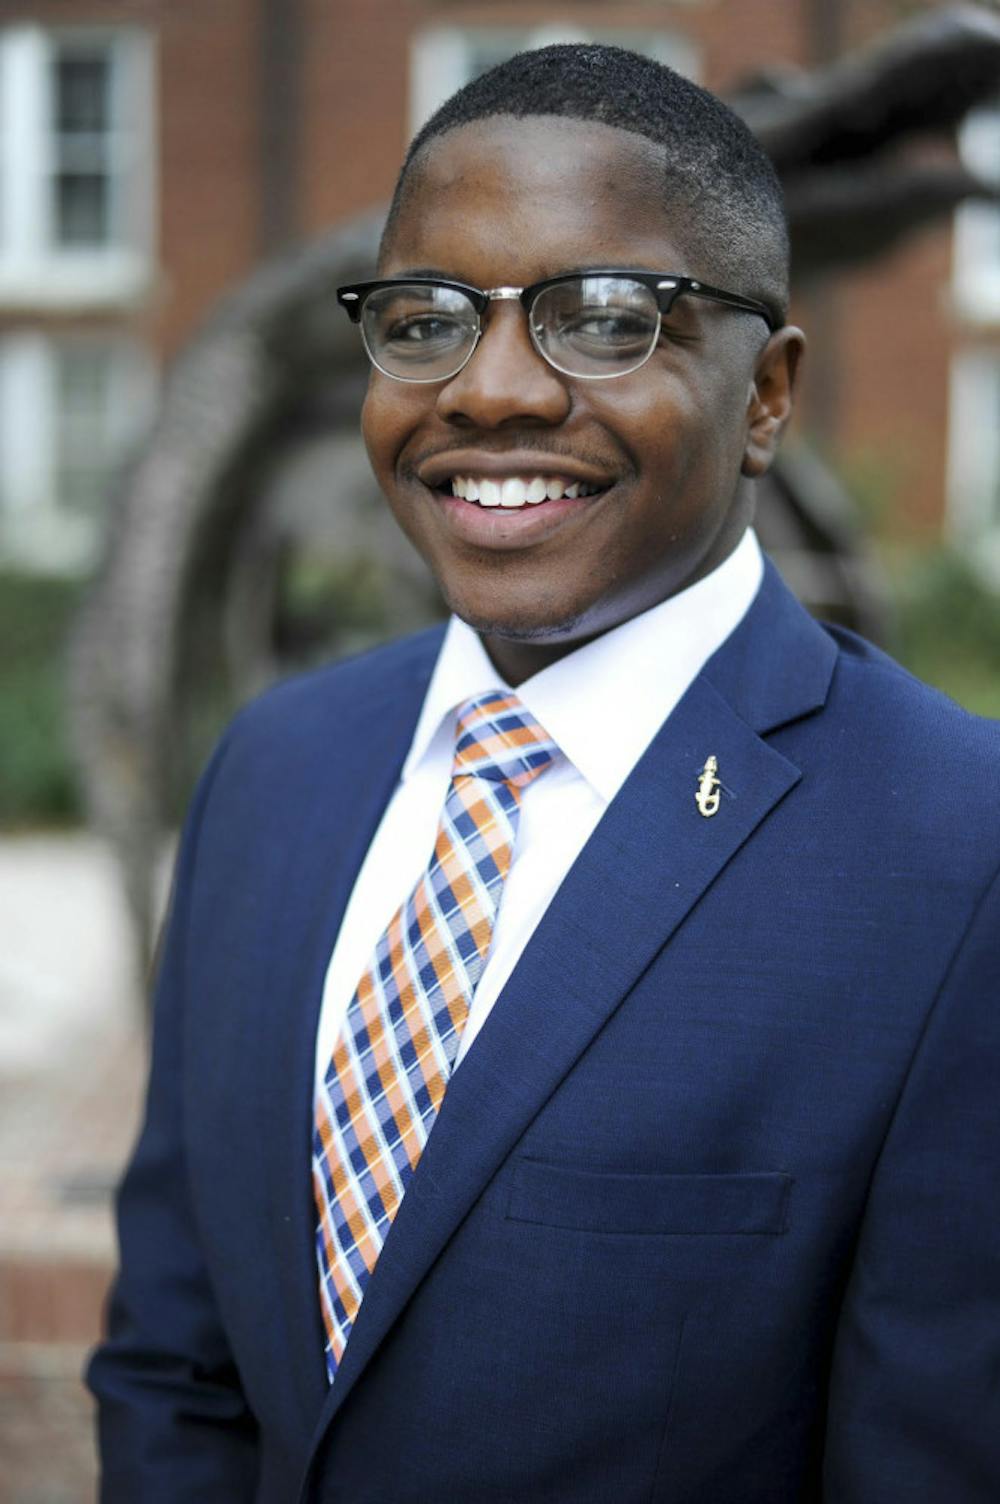 <p>Brendon “BJ” Jonassaint is a 21-year-old UF health science junior running for Student Body vice president with Impact Party.</p><p>Jonassaint is currently a Cabinet liaison for UF Student Senate. </p><p>He was also a member of the Florida Cicerones, a Preview staffer, a Preview coordinator and a J. Wayne Reitz Scholar. </p><p>He is also a member of the Black Student Union.</p><p>Jonassaint said he especially hopes to improve student life.</p><p>“I think I should be elected because of my passion for the university and my passion for helping students move forward, helping students out in general,” he said.</p>